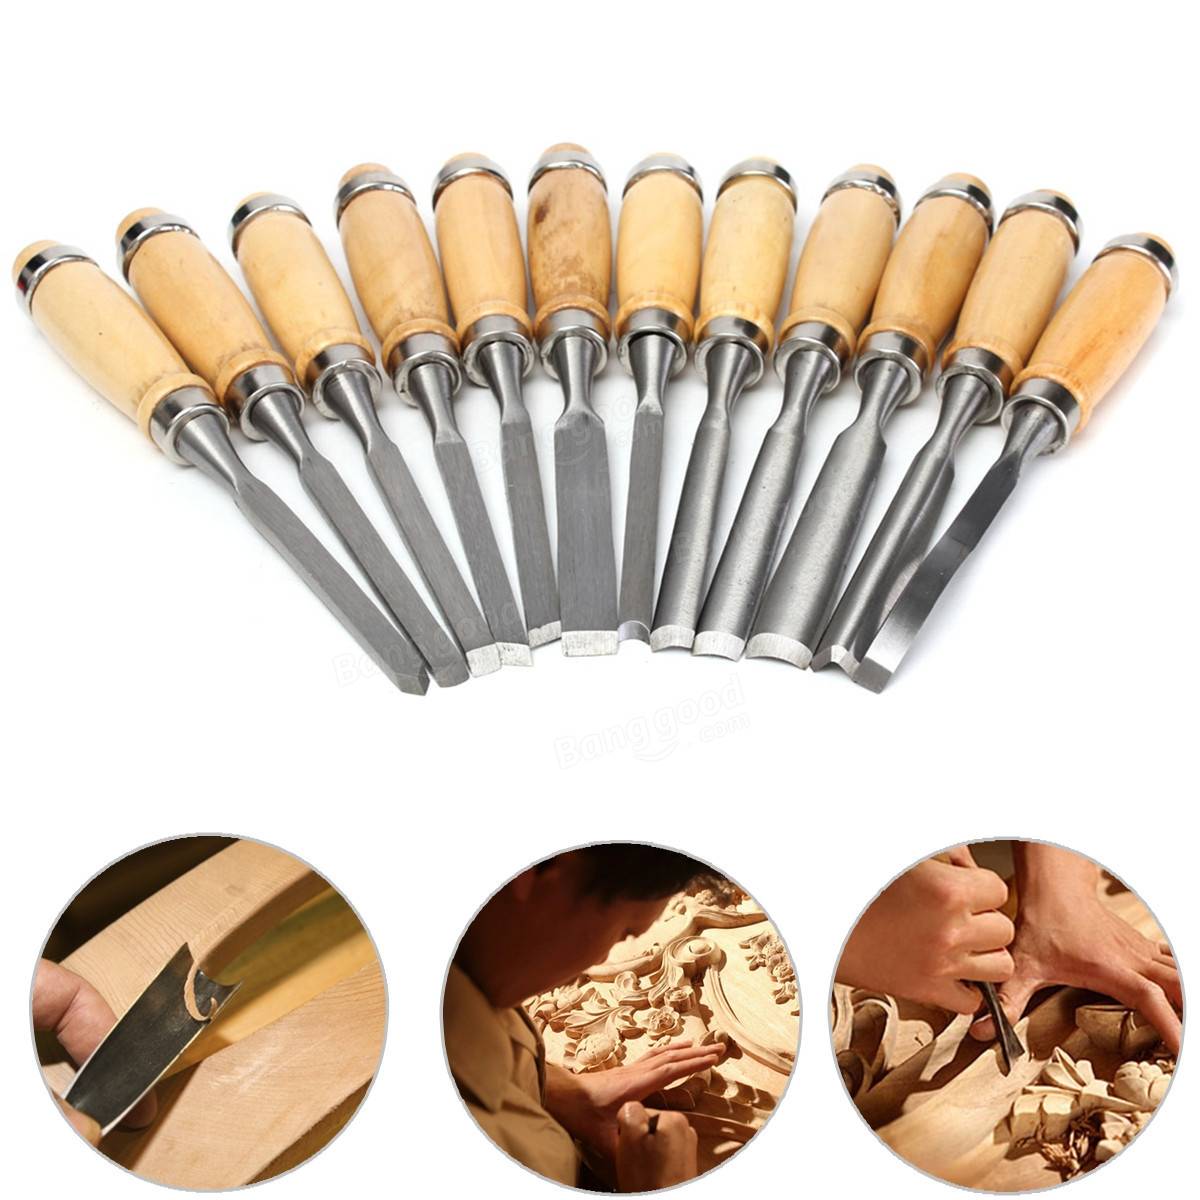 12Pcs Professional Wood Carving Hand Chisel Tool Set For ...